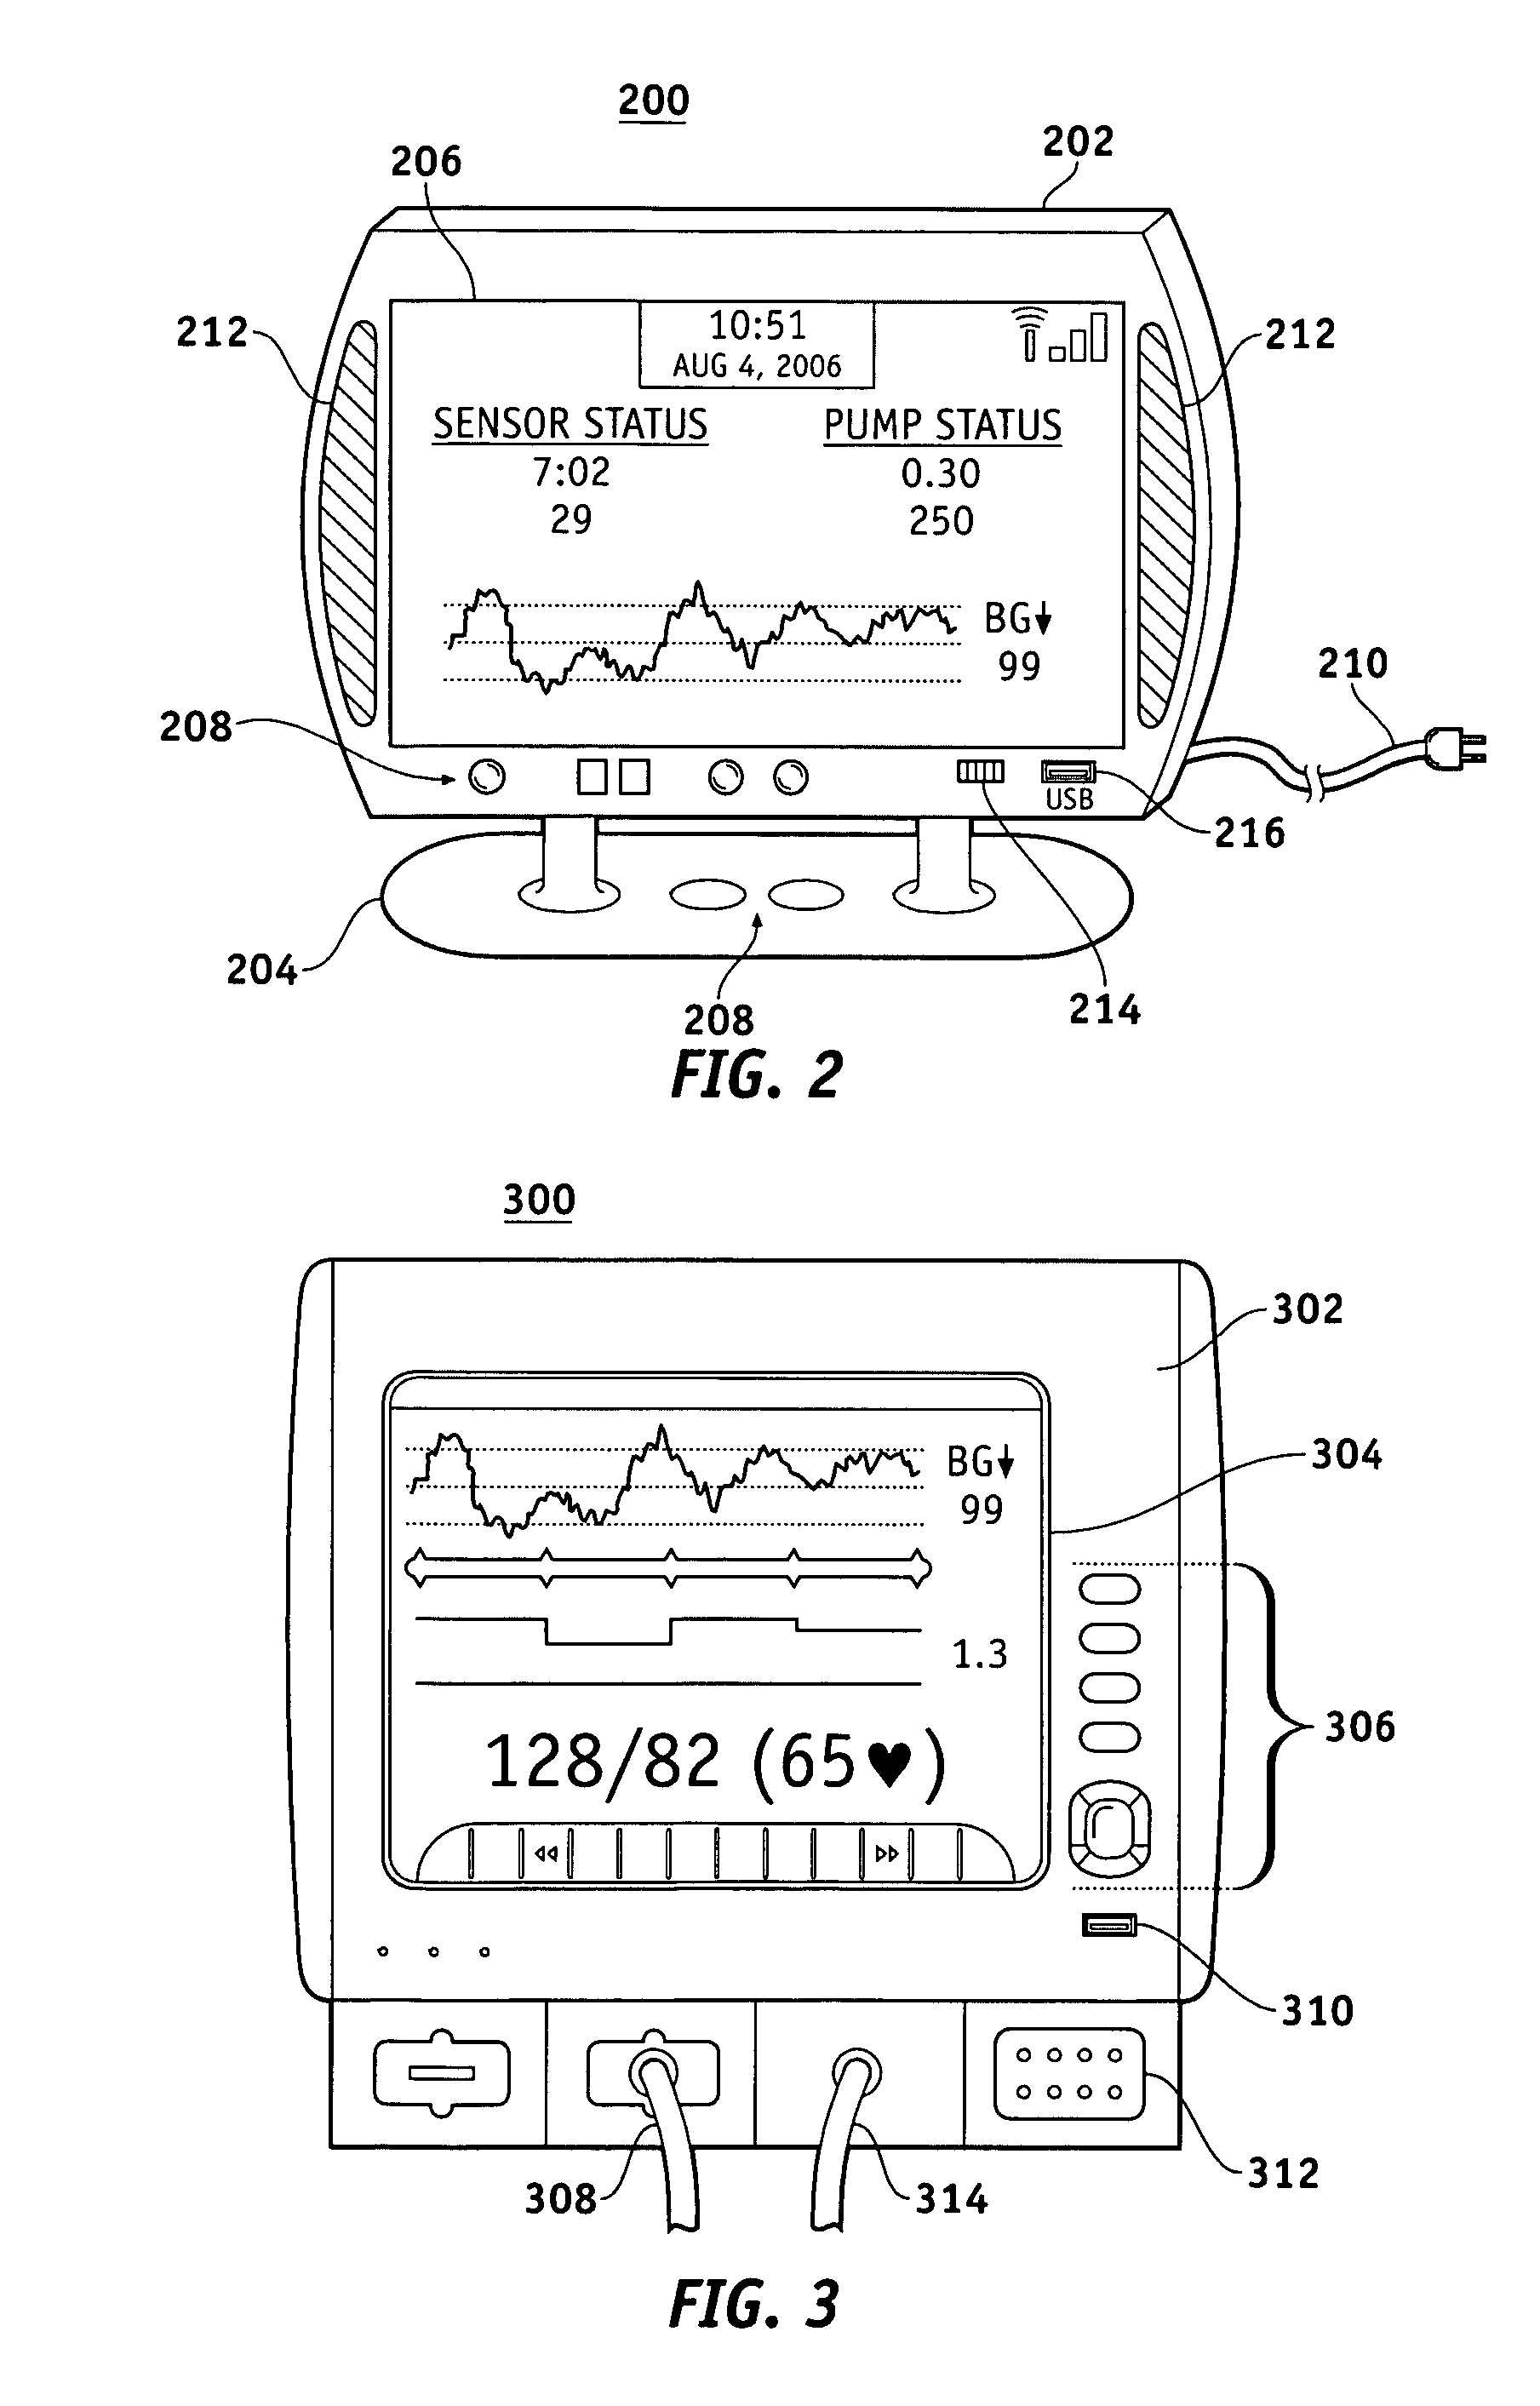 Data translation device with nonvolatile memory for a networked medical device system